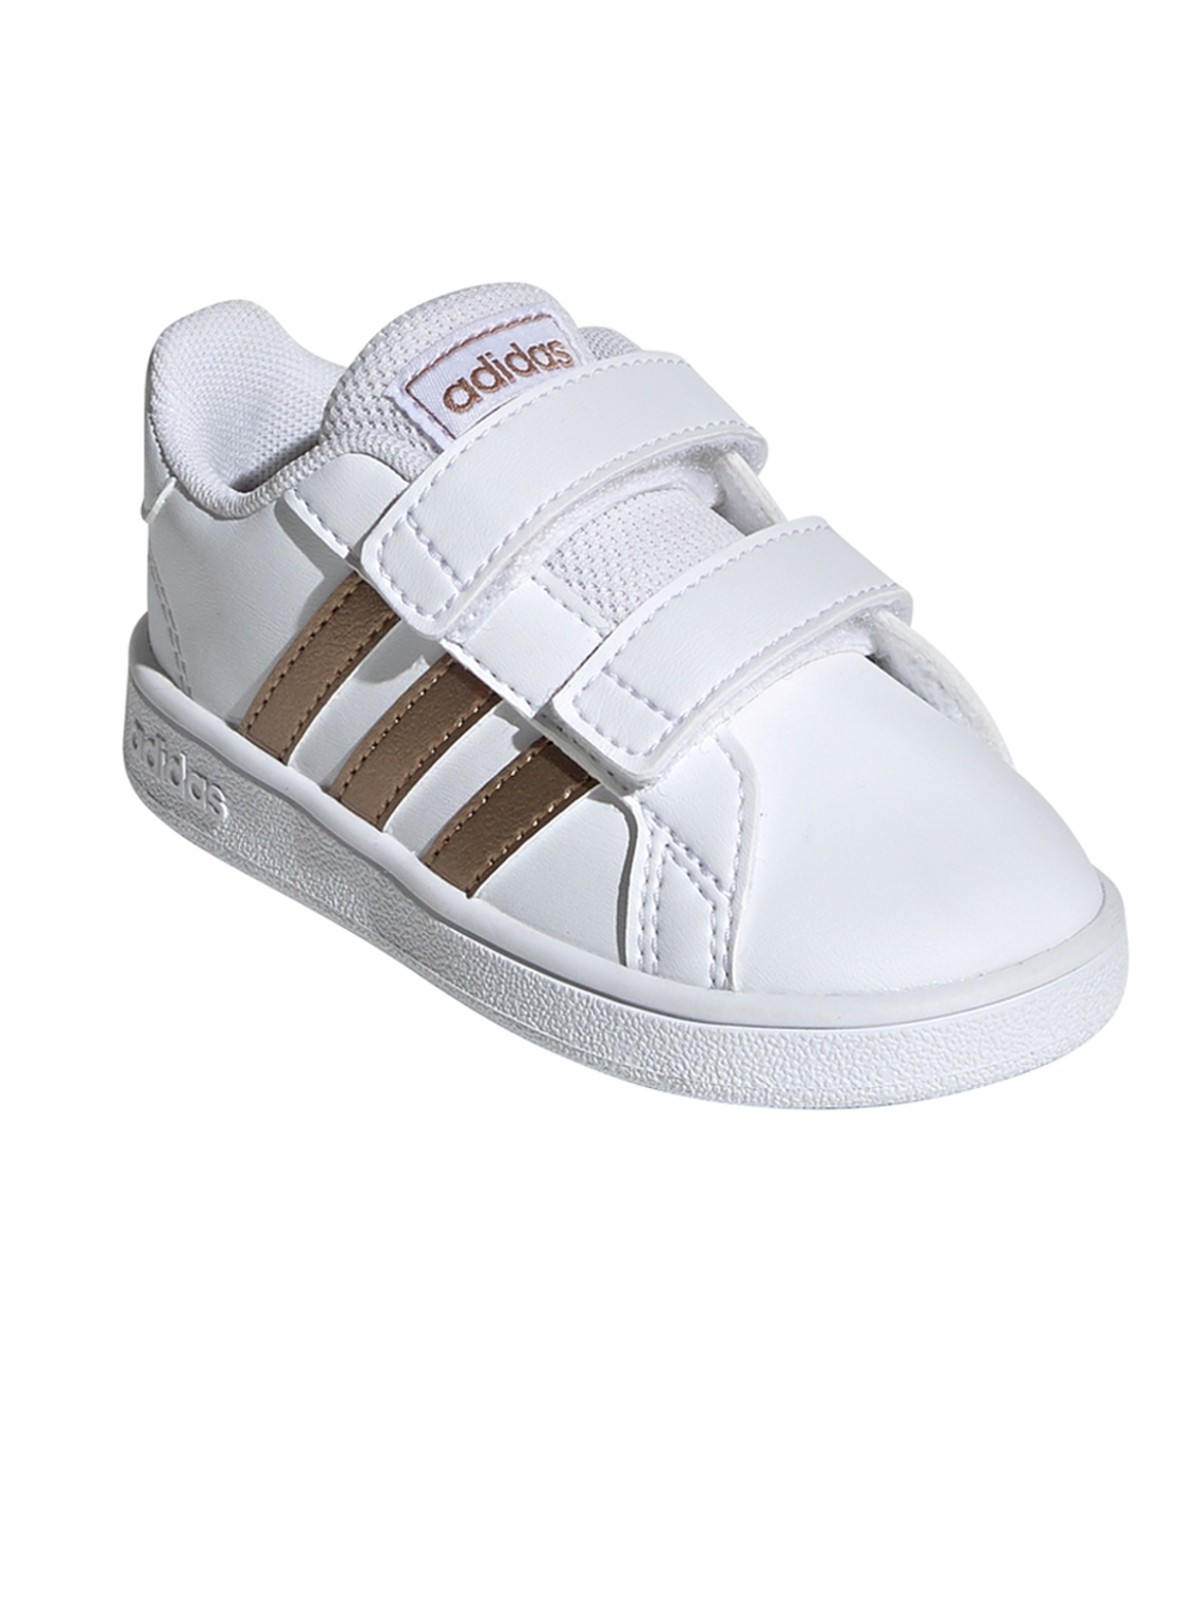 chaussure fille 27 adidas